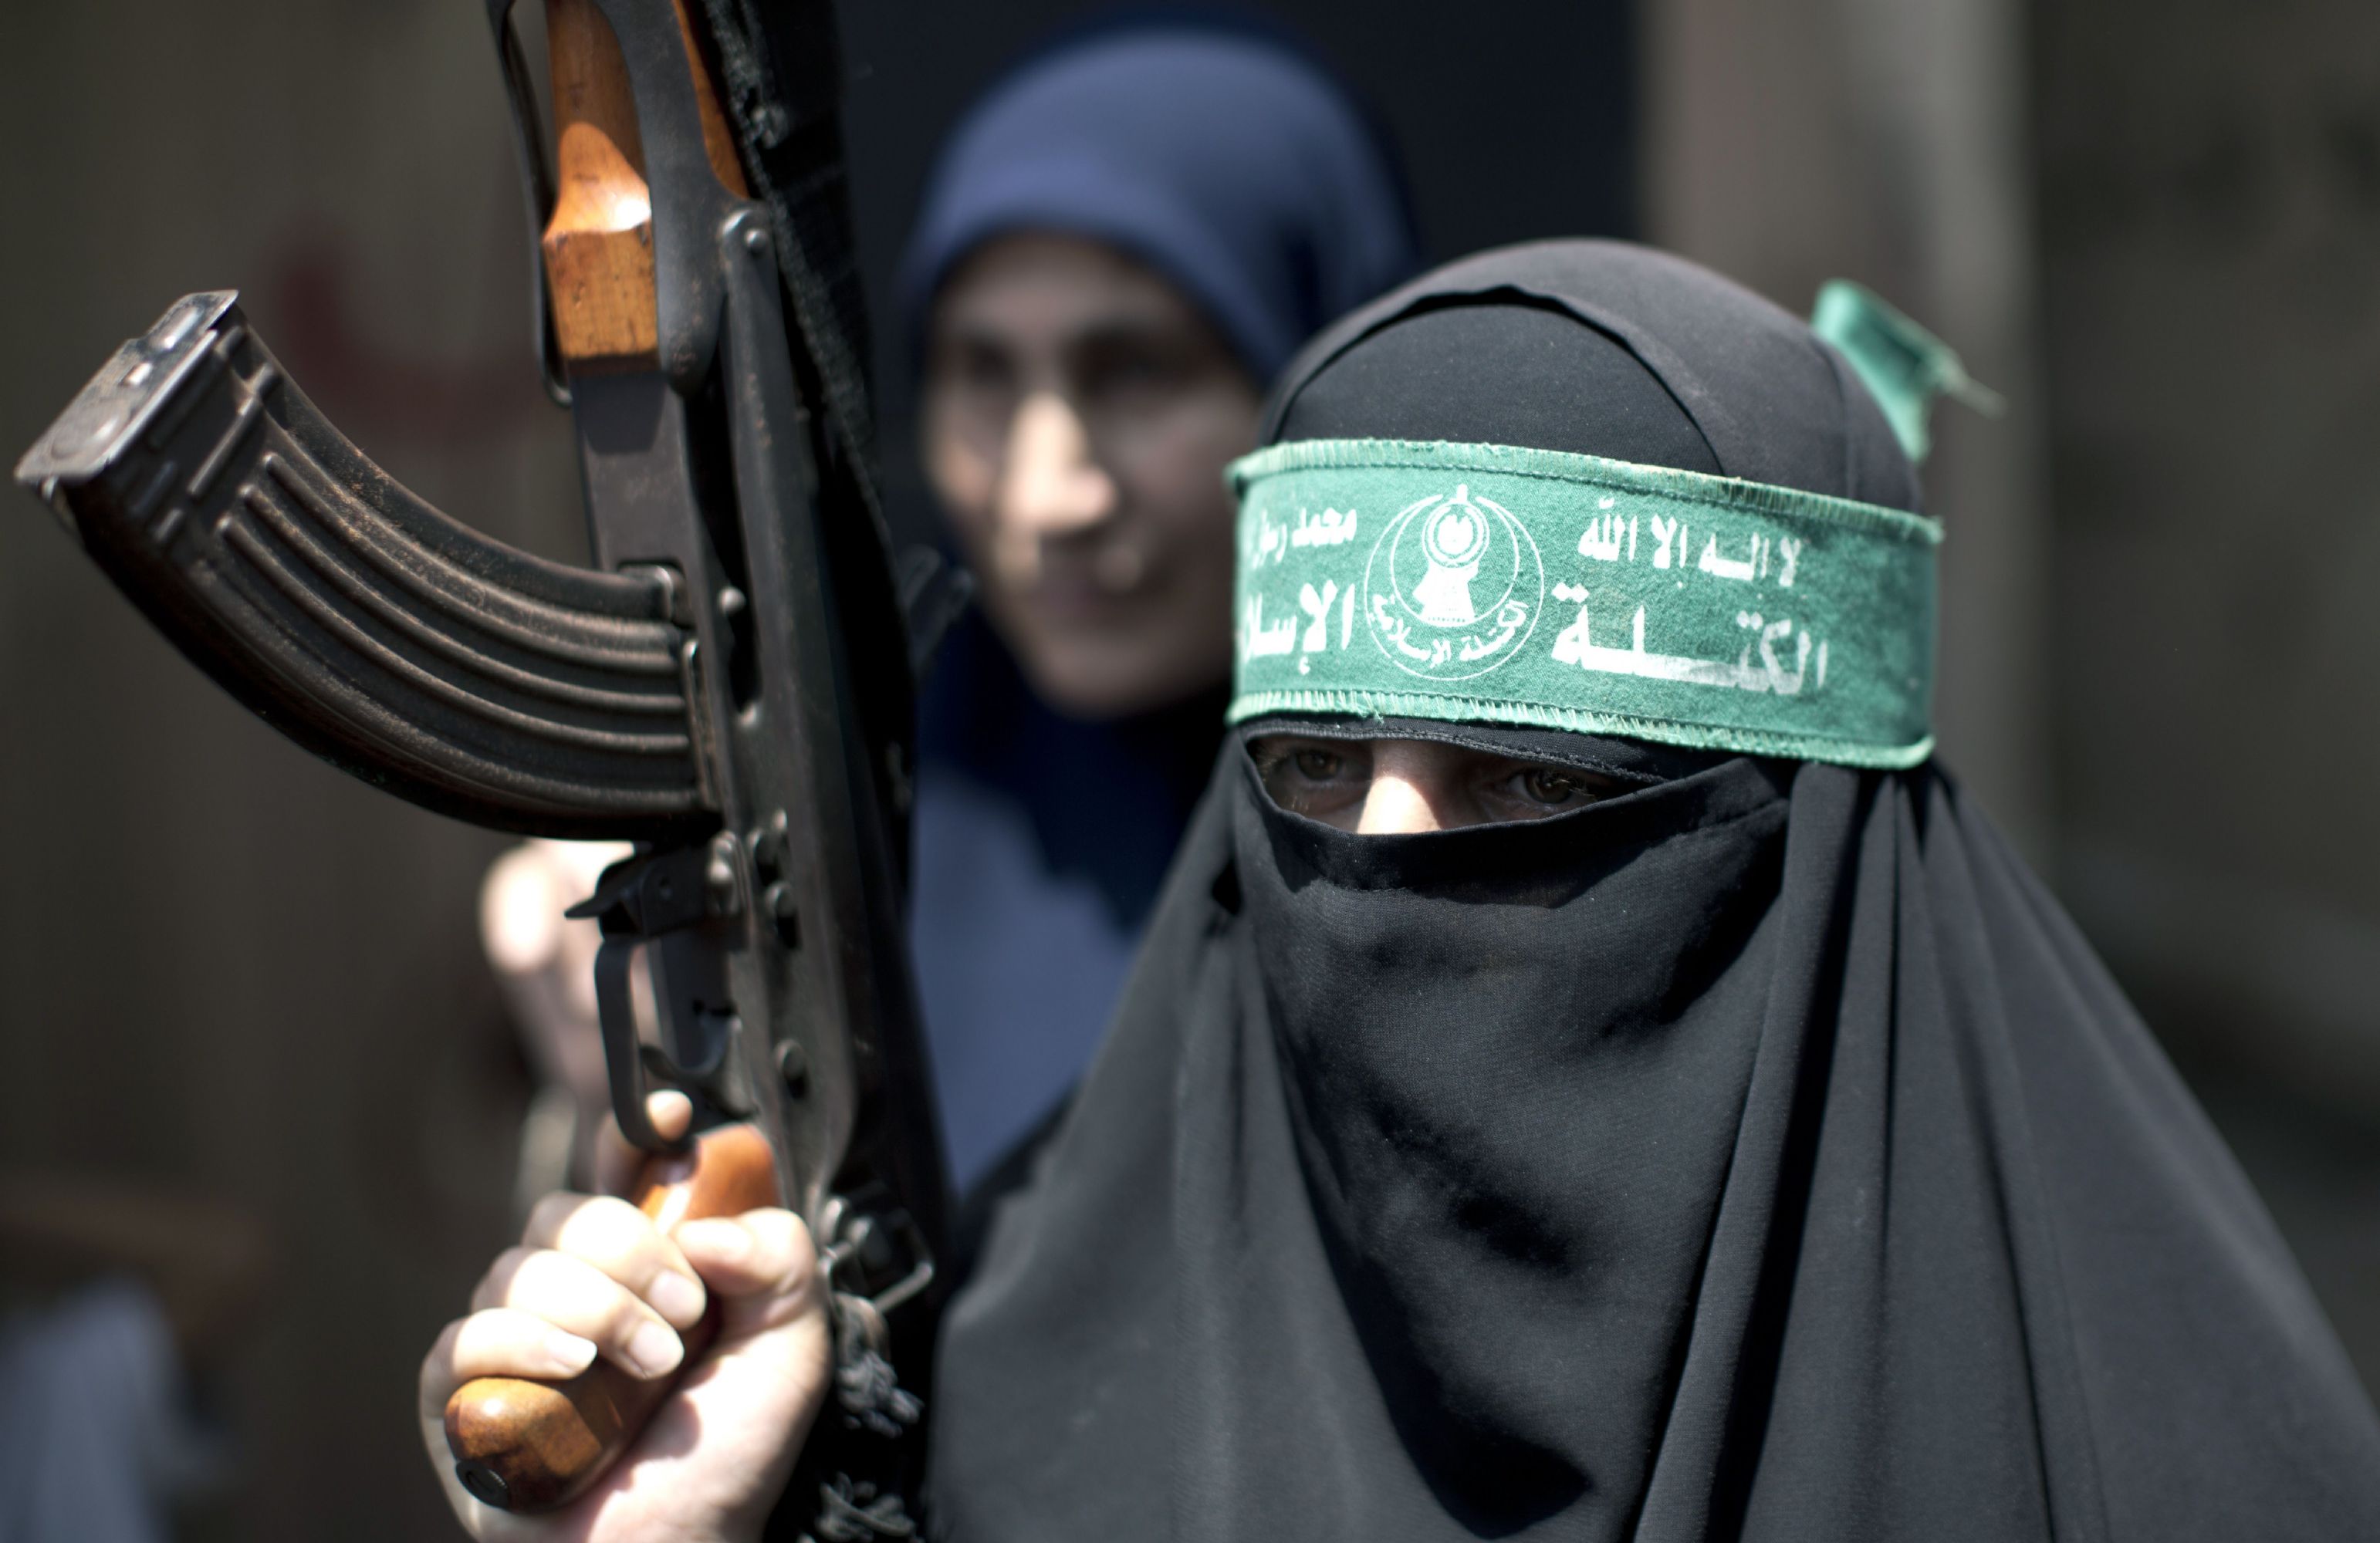 Palestinian woman Hamas supporter holds up a rifle.